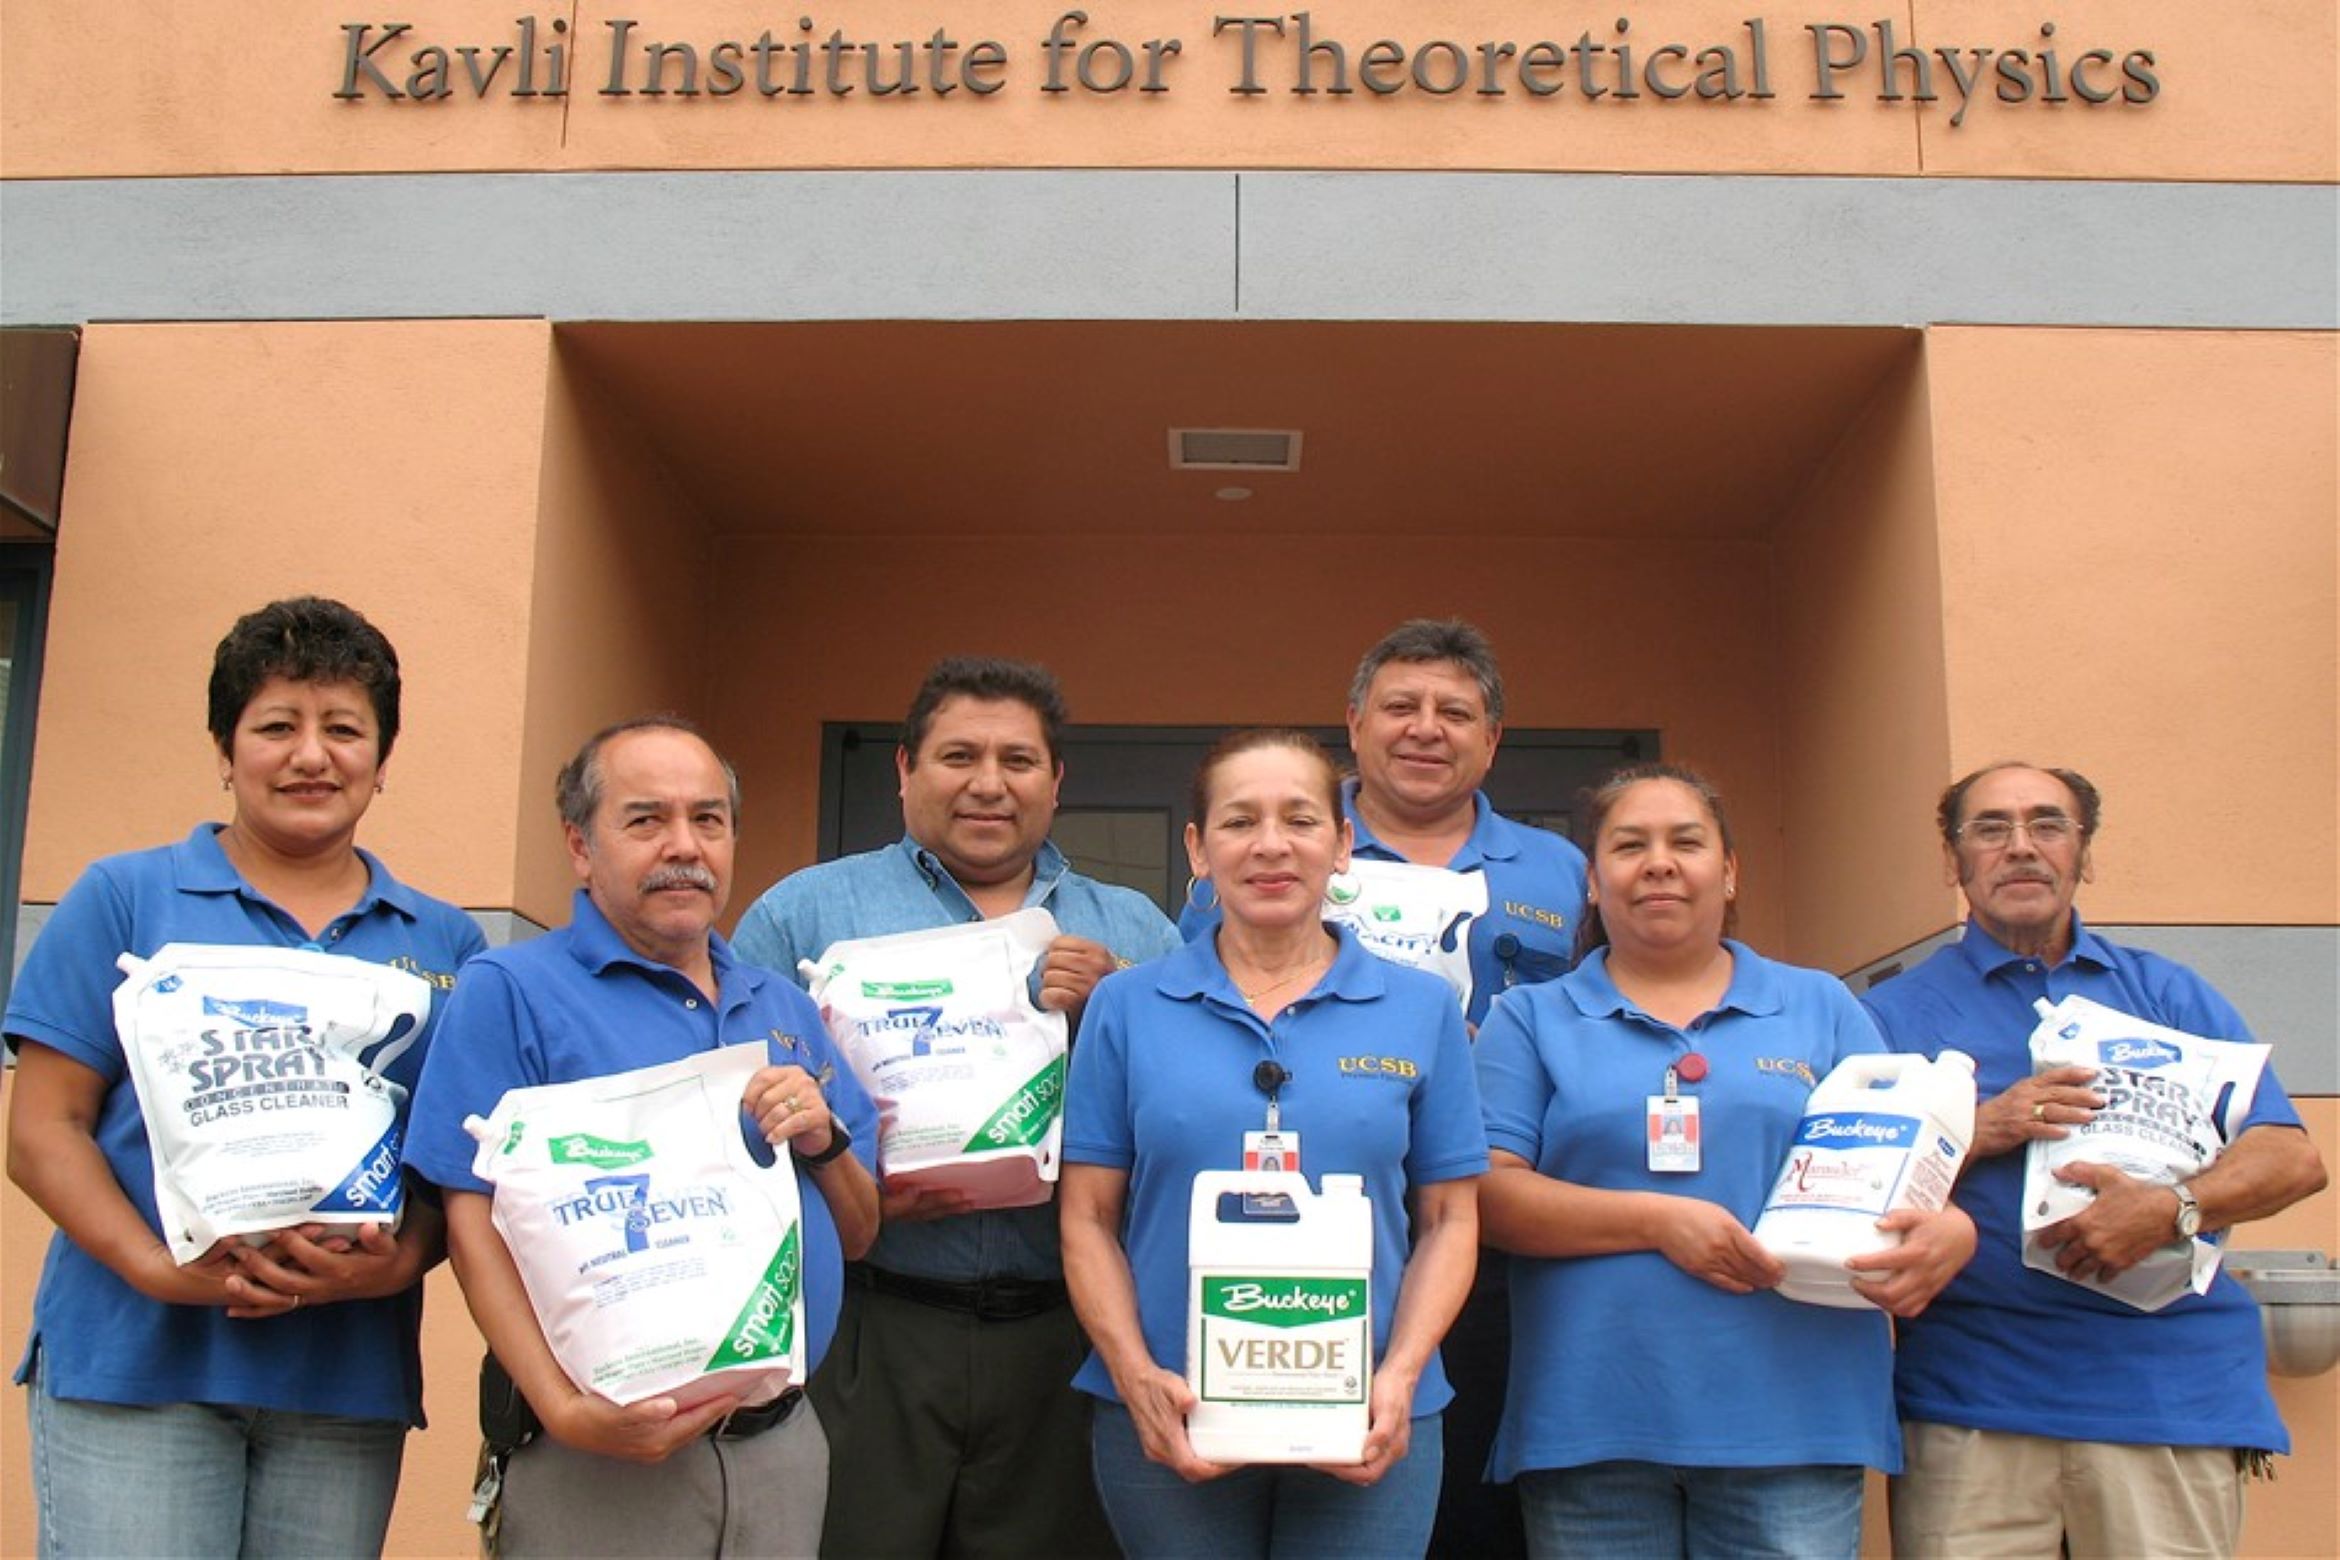 UC Santa Barbara staff holding green cleaning products standing in front of Kavli Institute for Theoretical Physics building sign